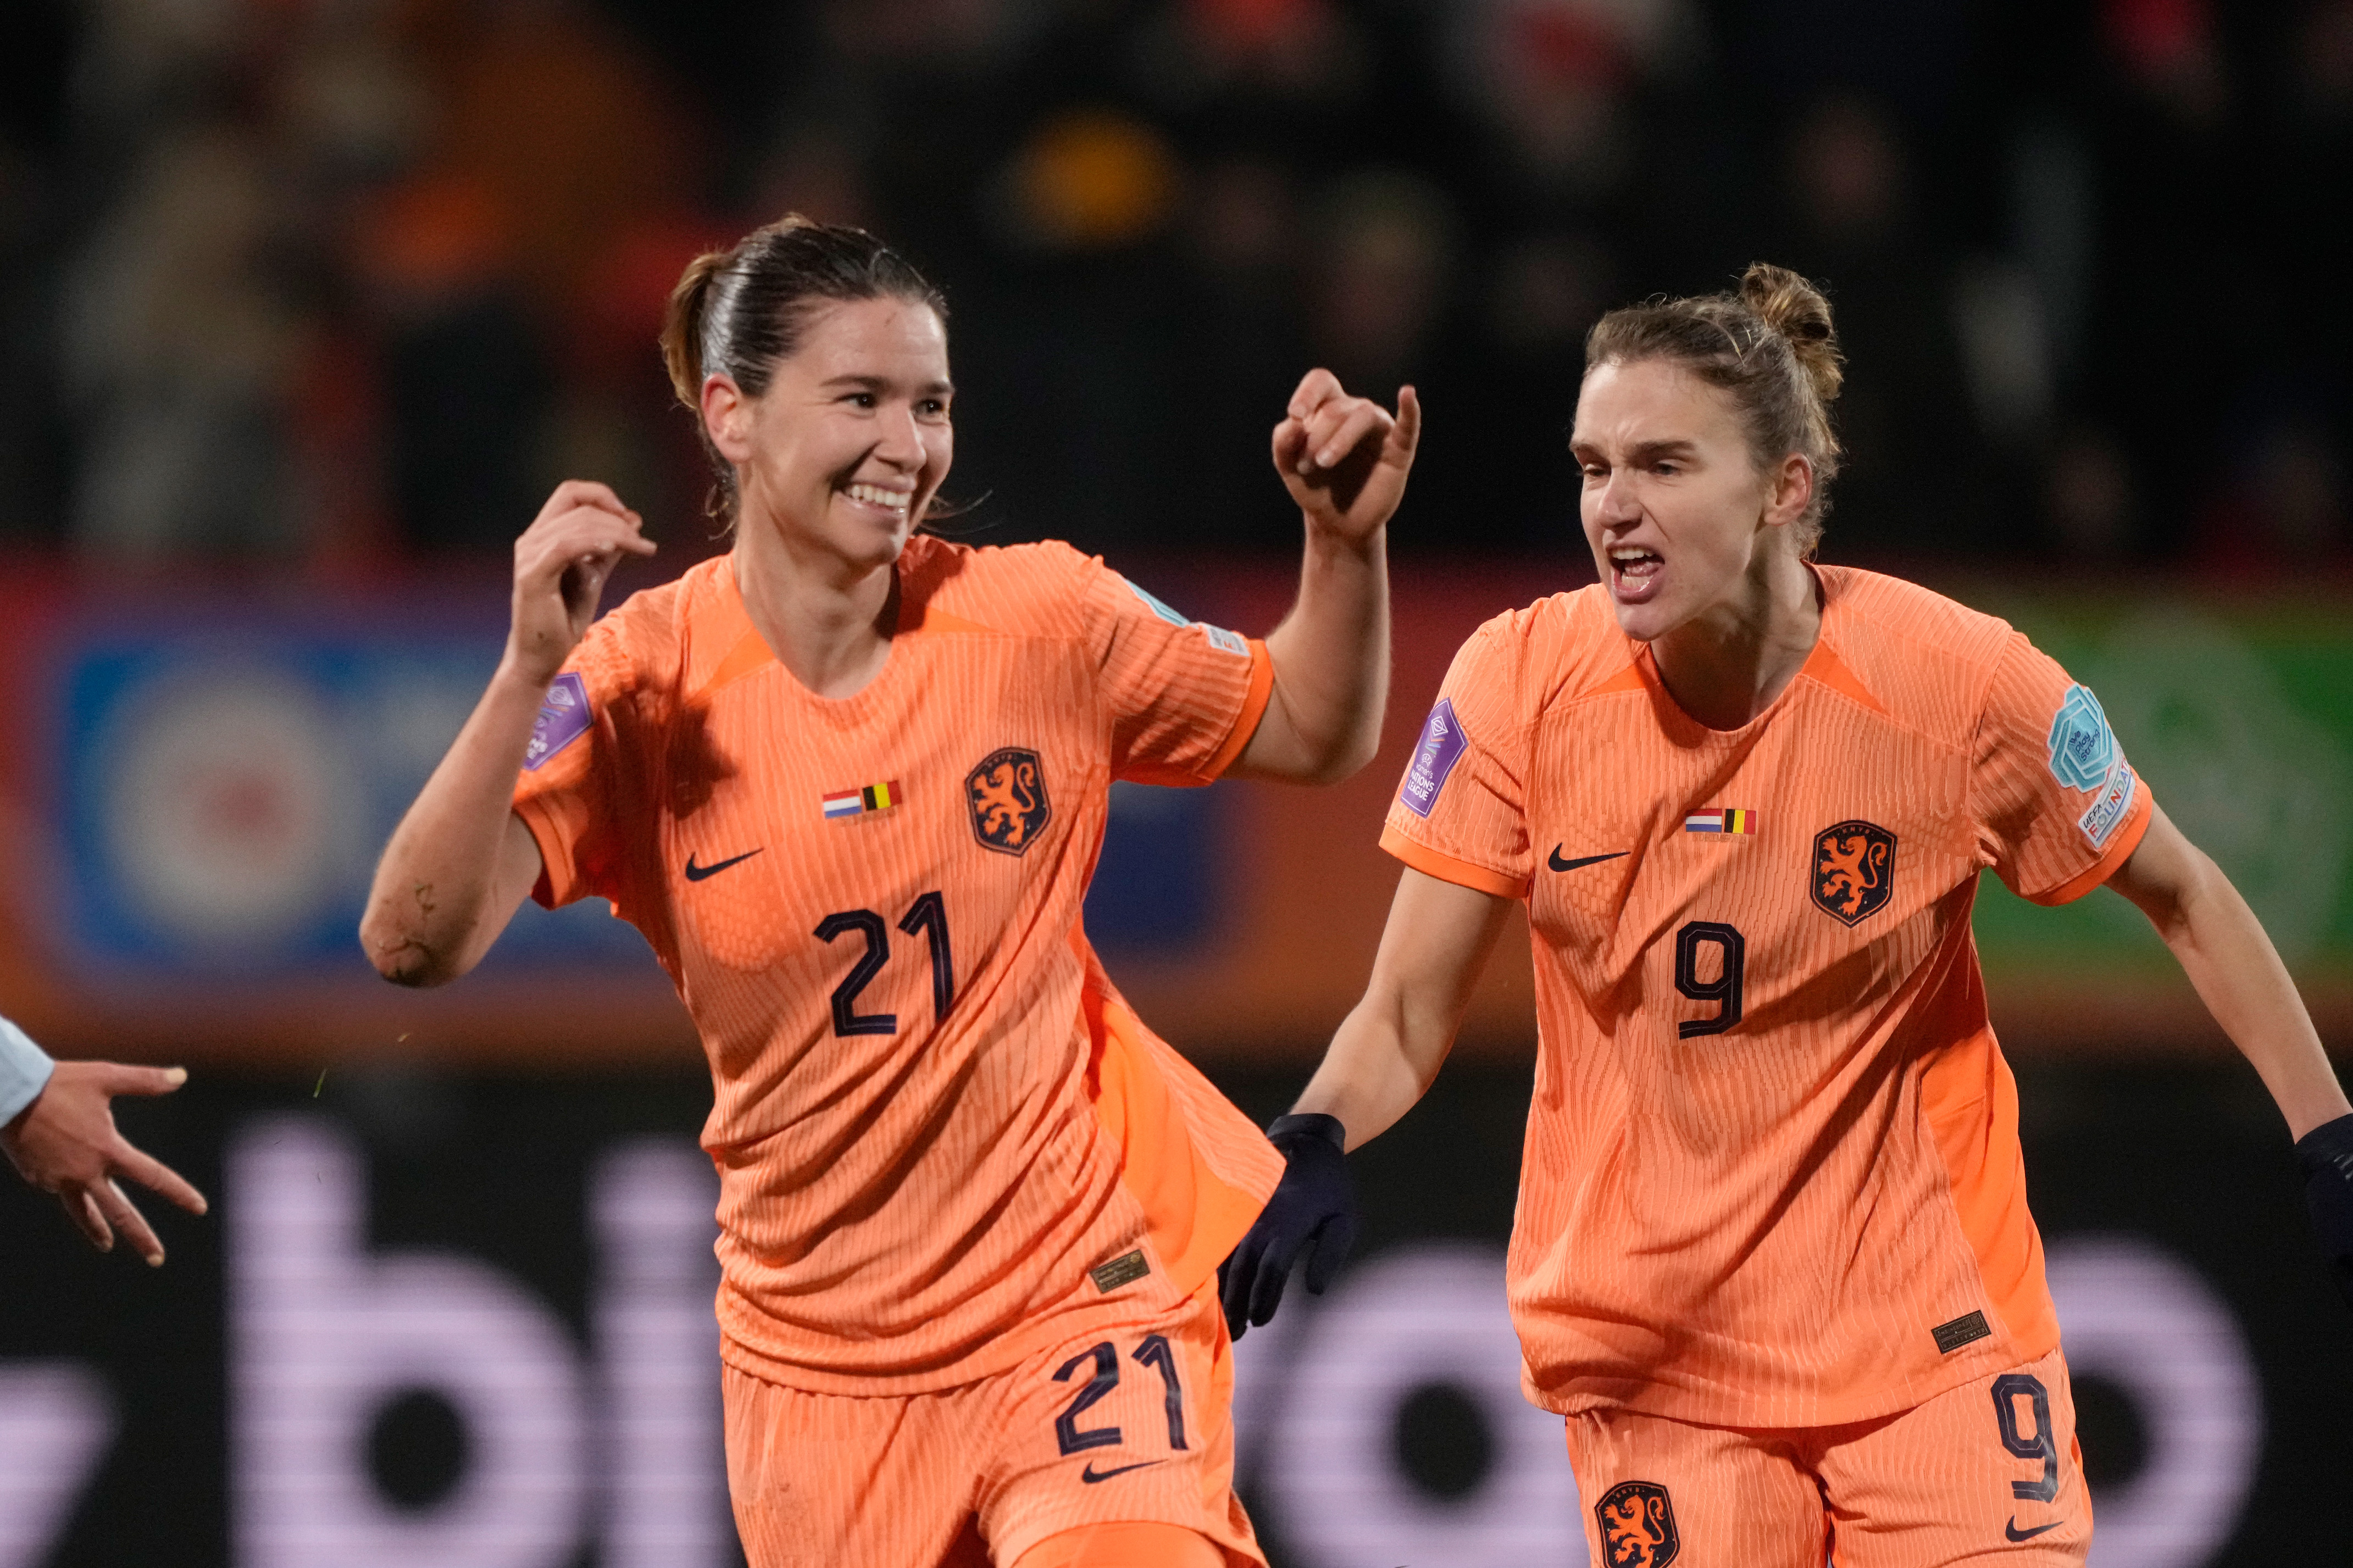 Vivianne Miedema and her Dutch team-mates pipped the Lionesses to qualify